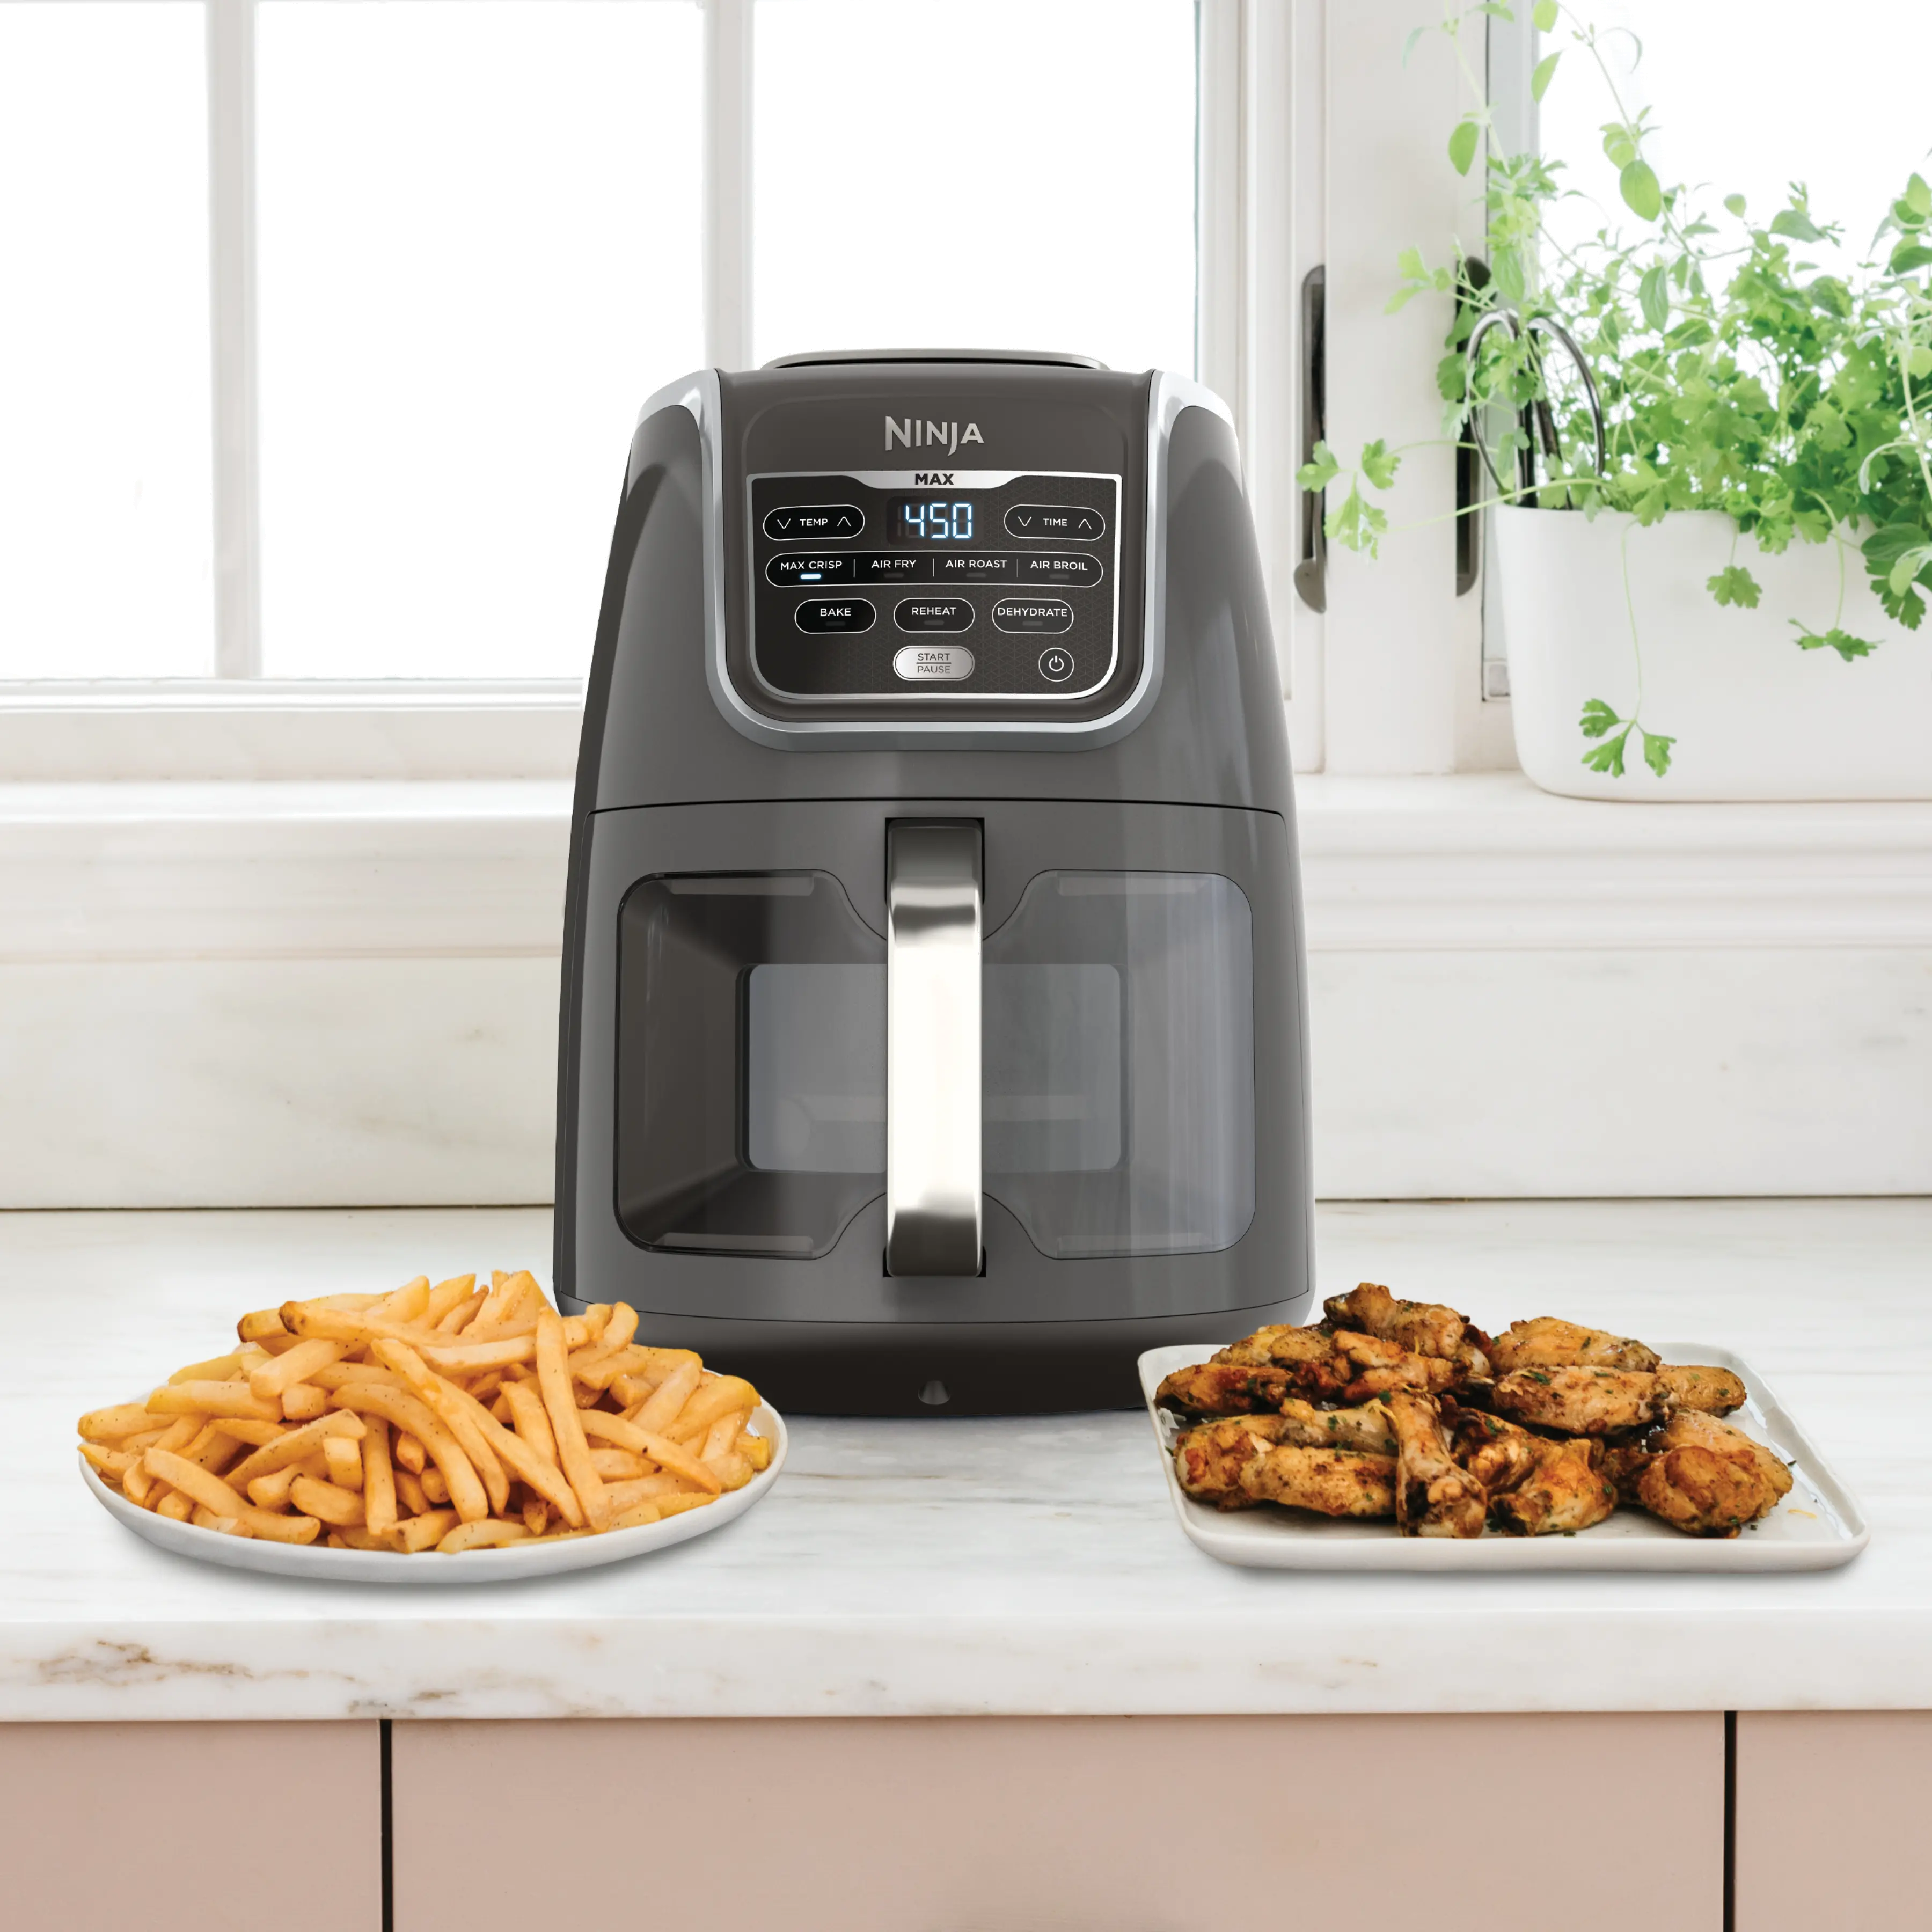 https://static.rcwilley.com/products/113343809/Ninja-EzView-7-Function-Air-Fryer-Max-XL-rcwilley-image1.webp